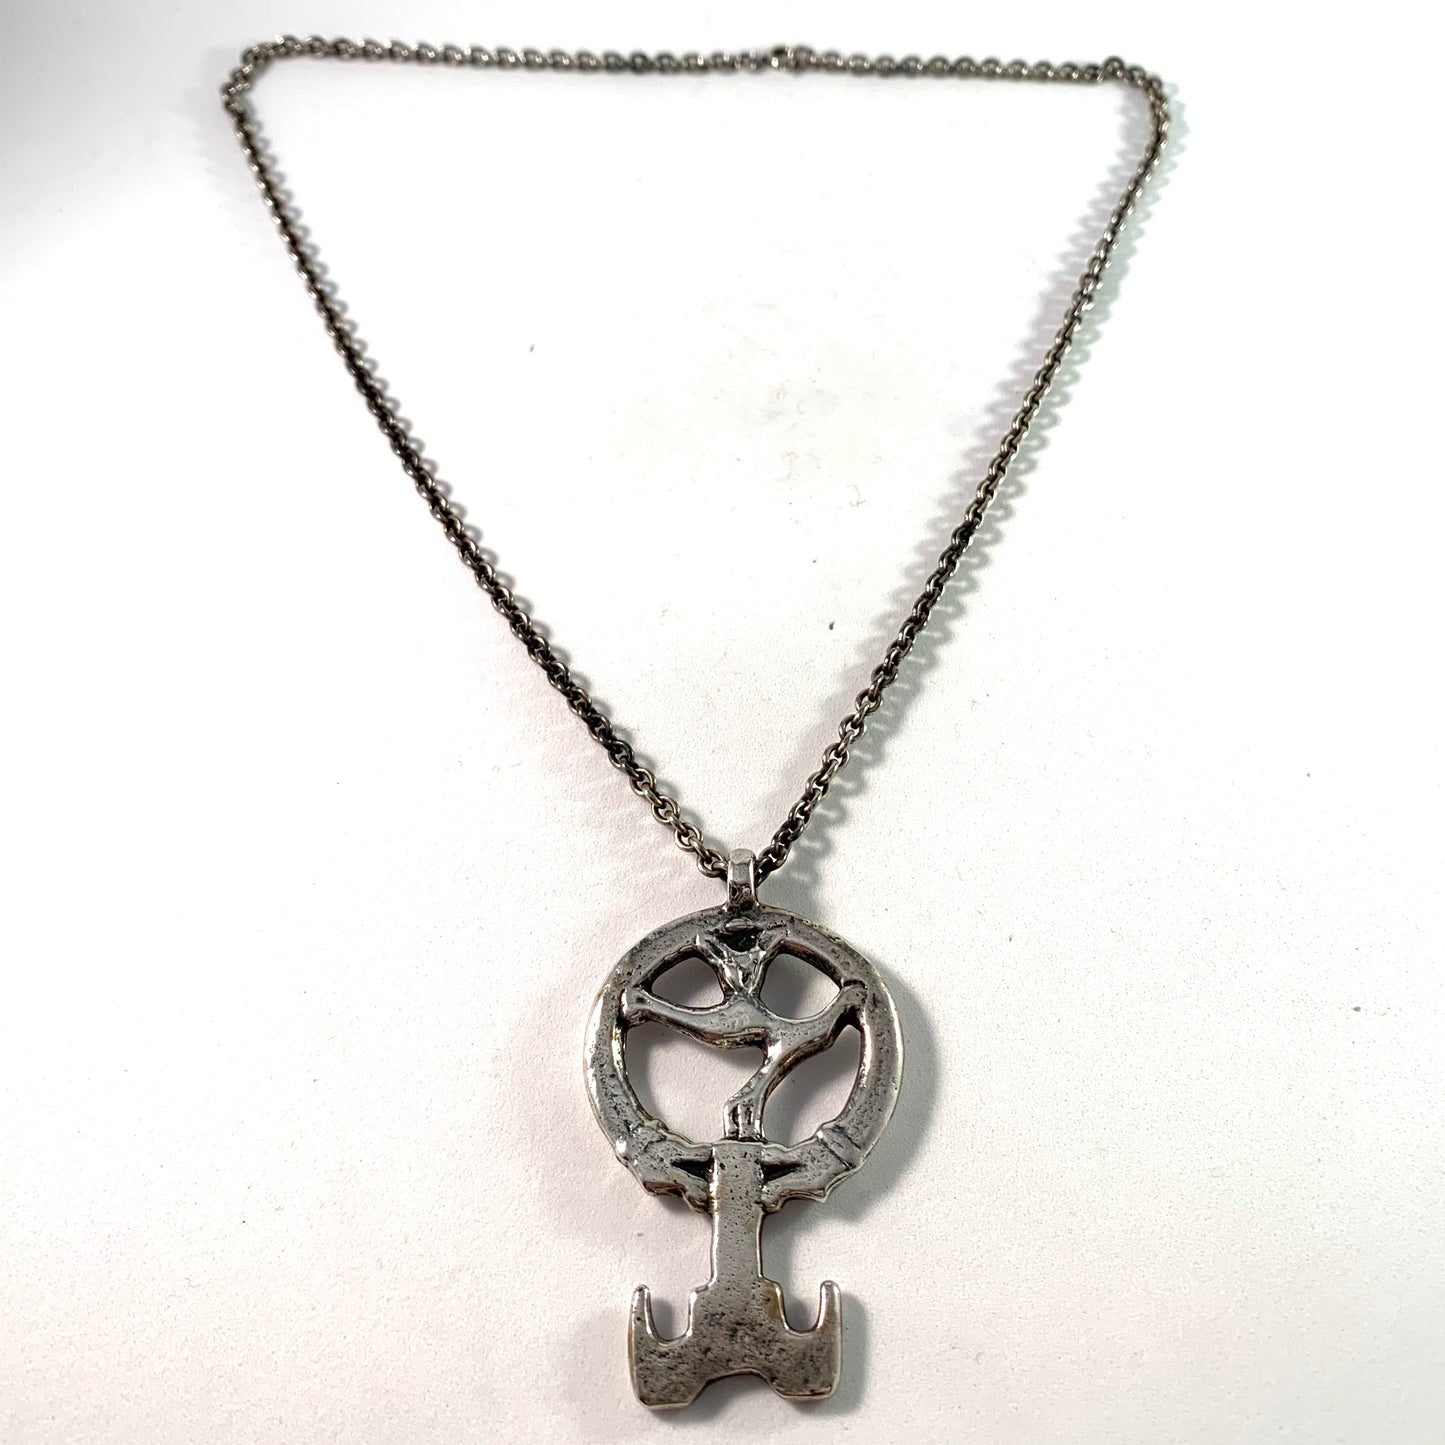 W A Bolin, Sweden 1969 Sterling Viking Copy Key to Valhalla Pendant Necklace.